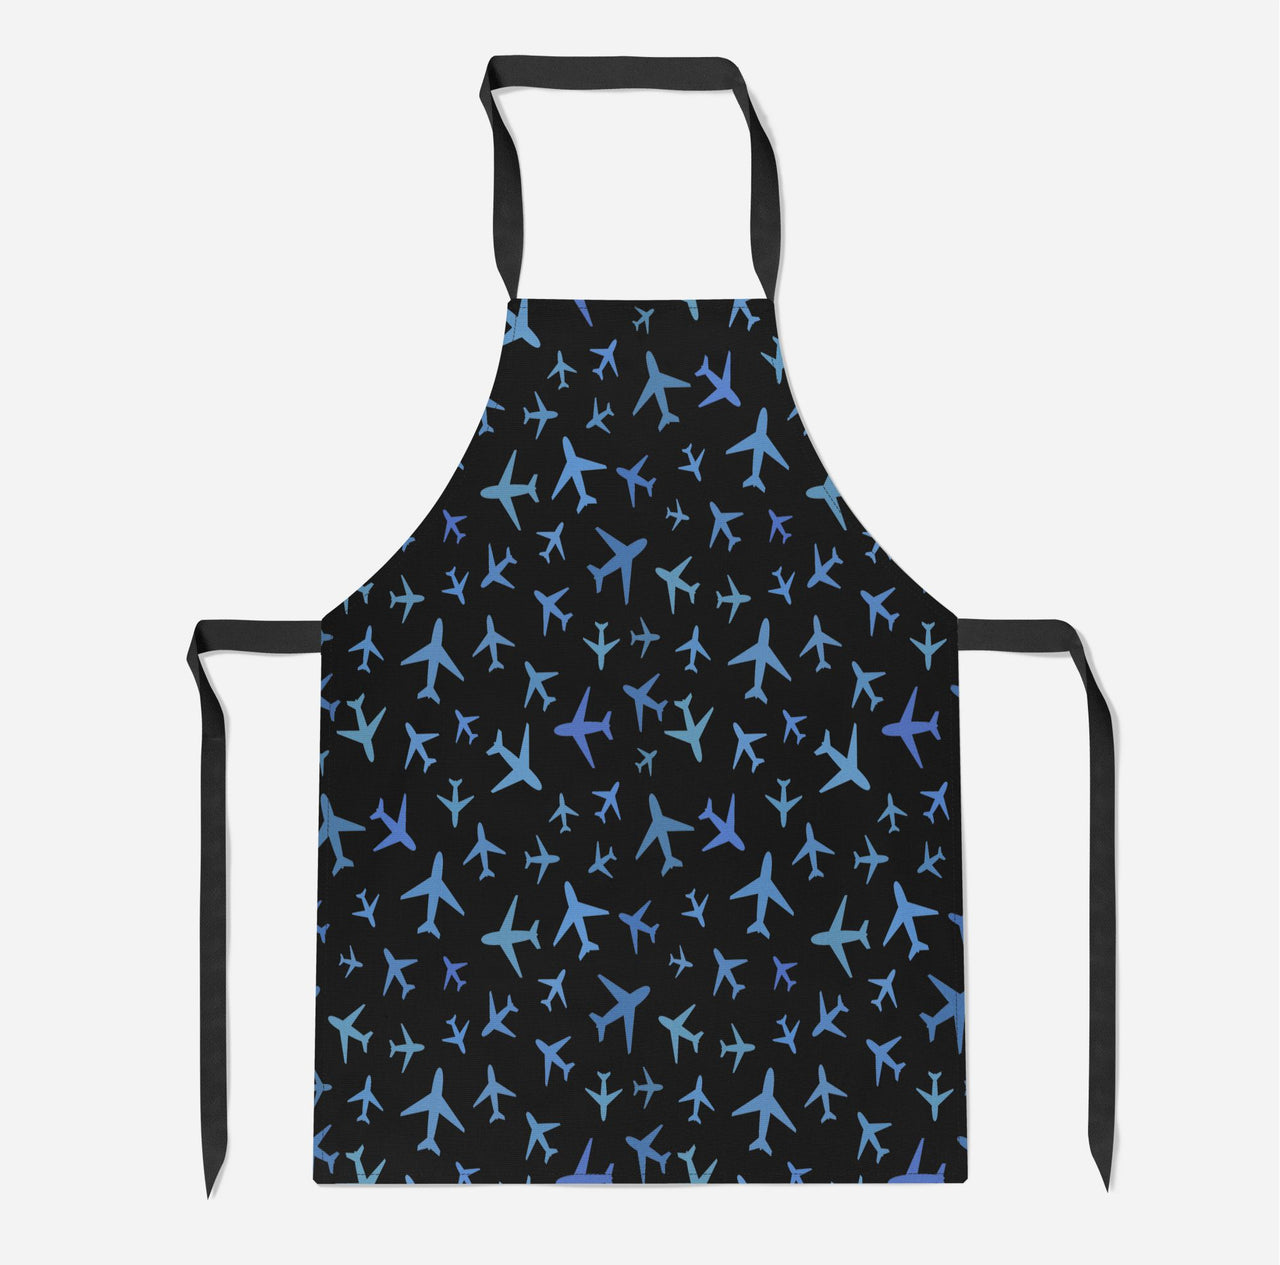 Many Airplanes Black Designed Kitchen Aprons